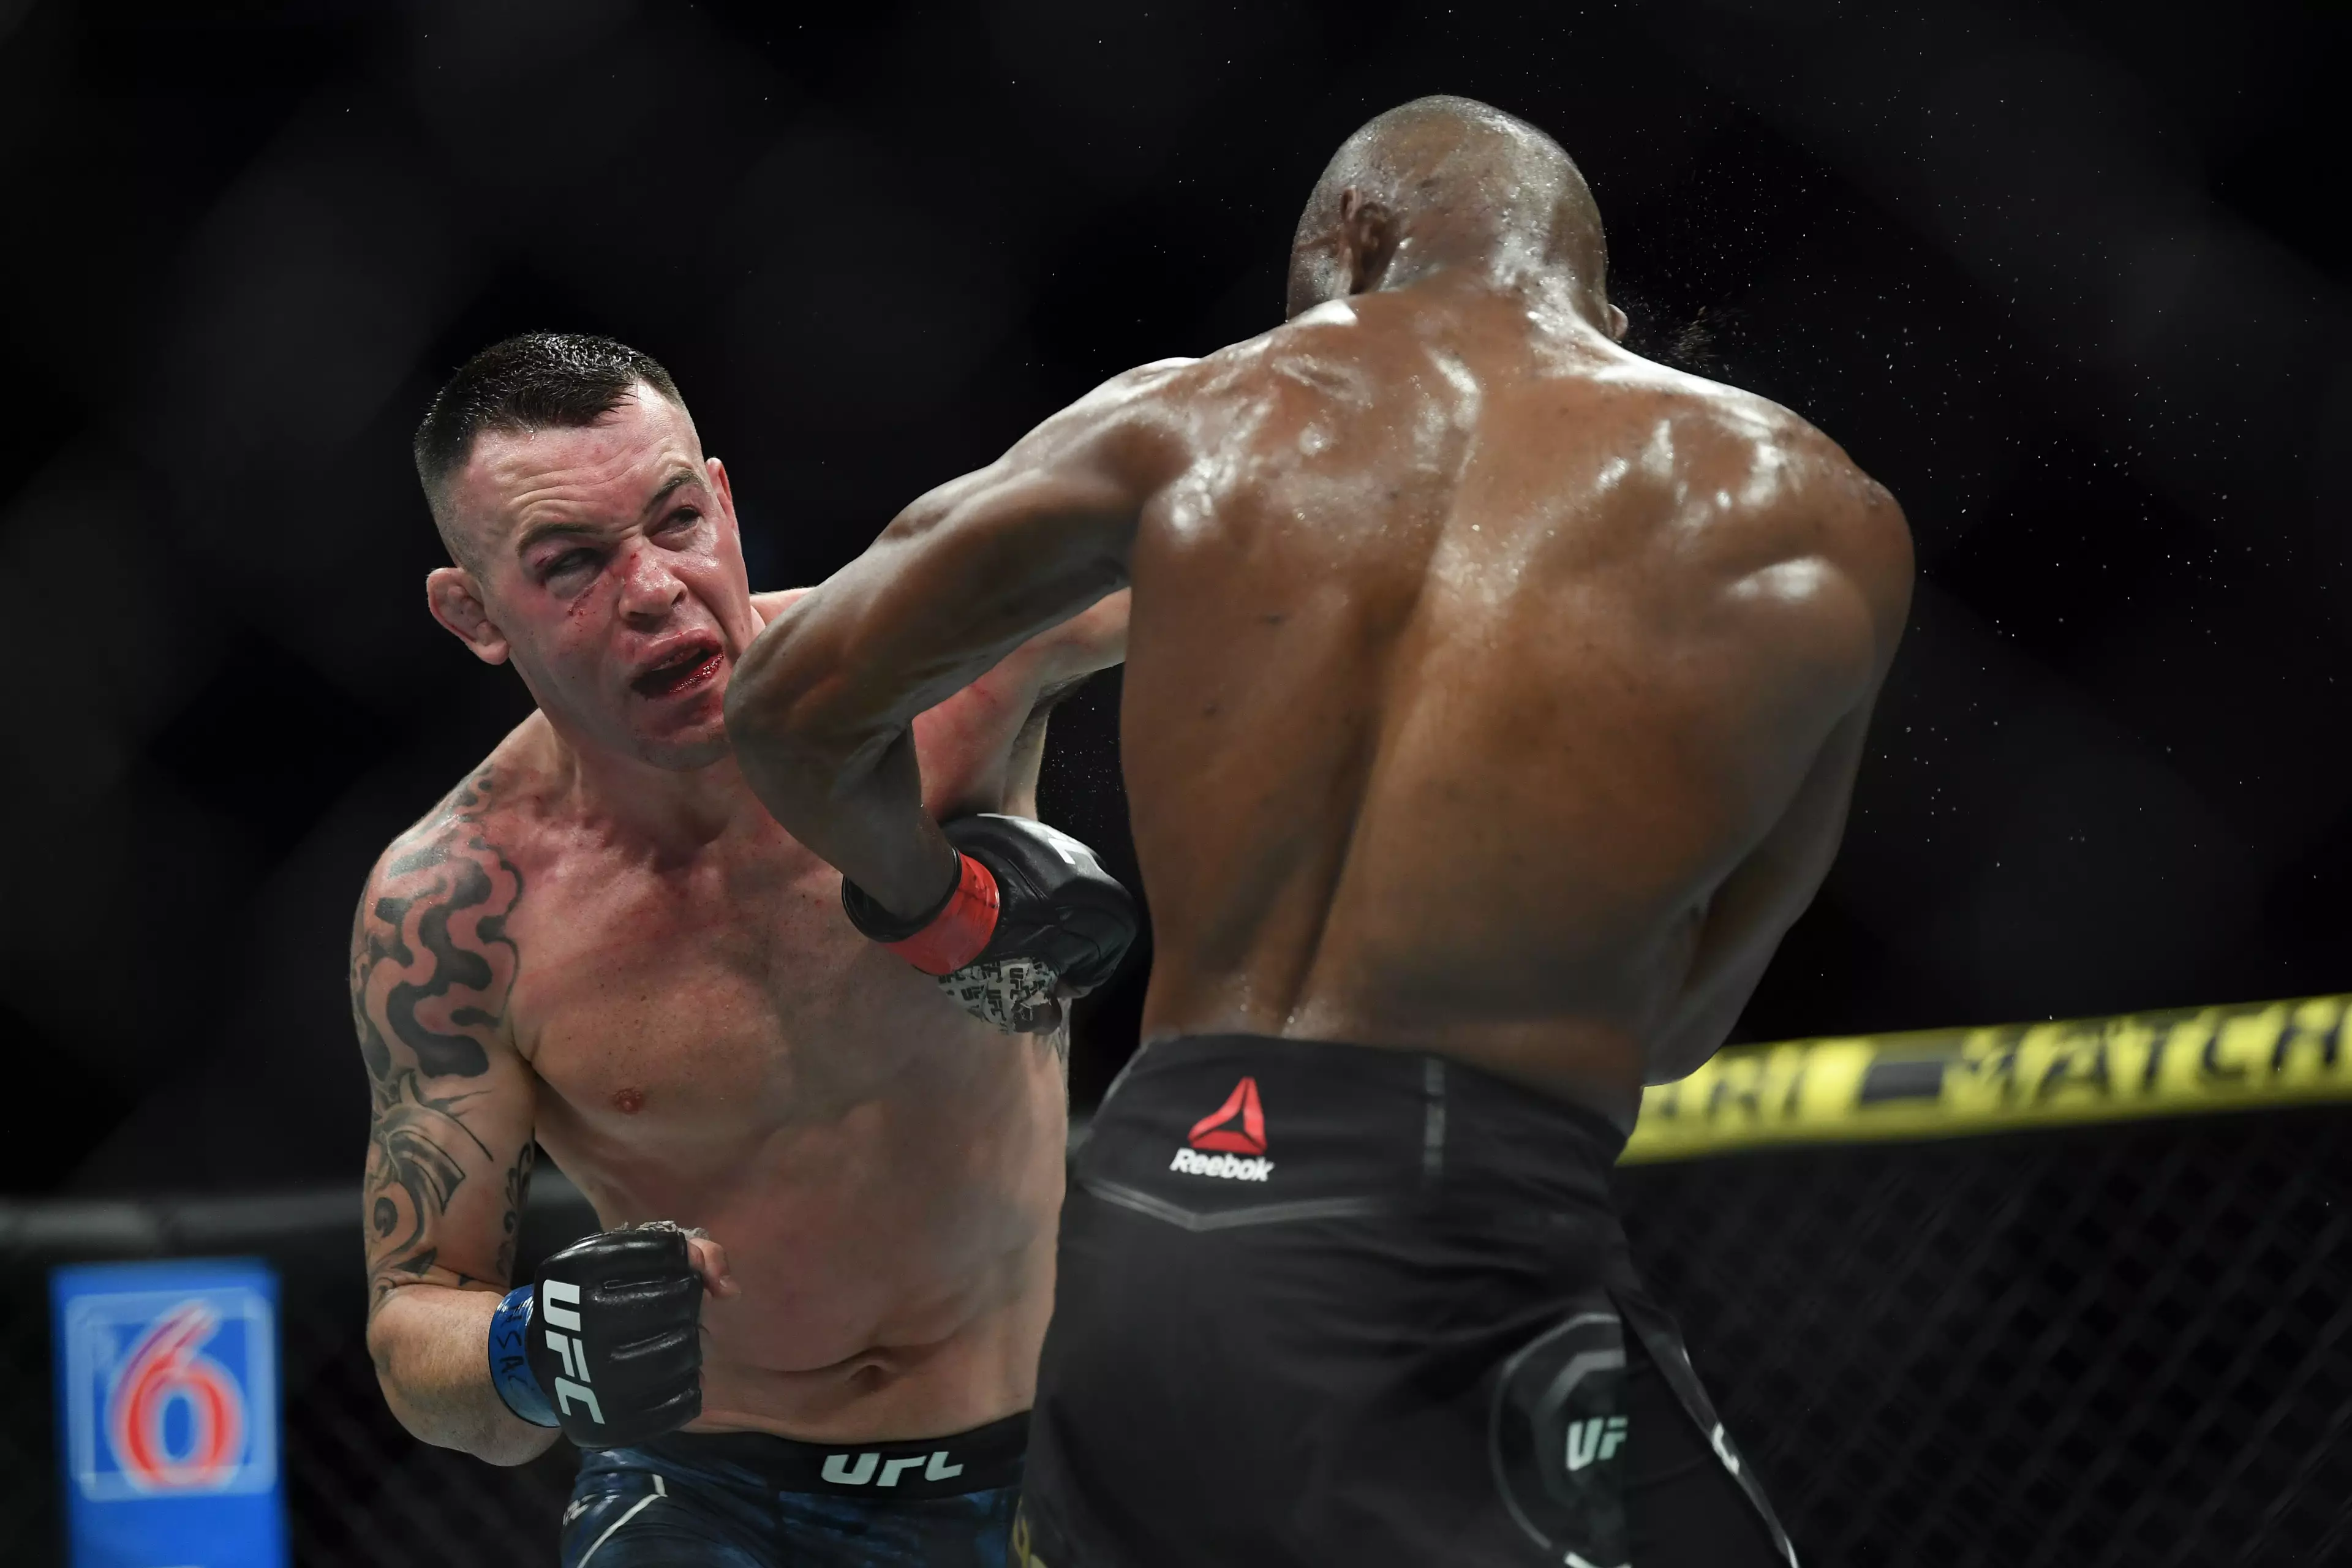 UFC 268 is set to be headlined by a rematch between Usman and Covington (Image